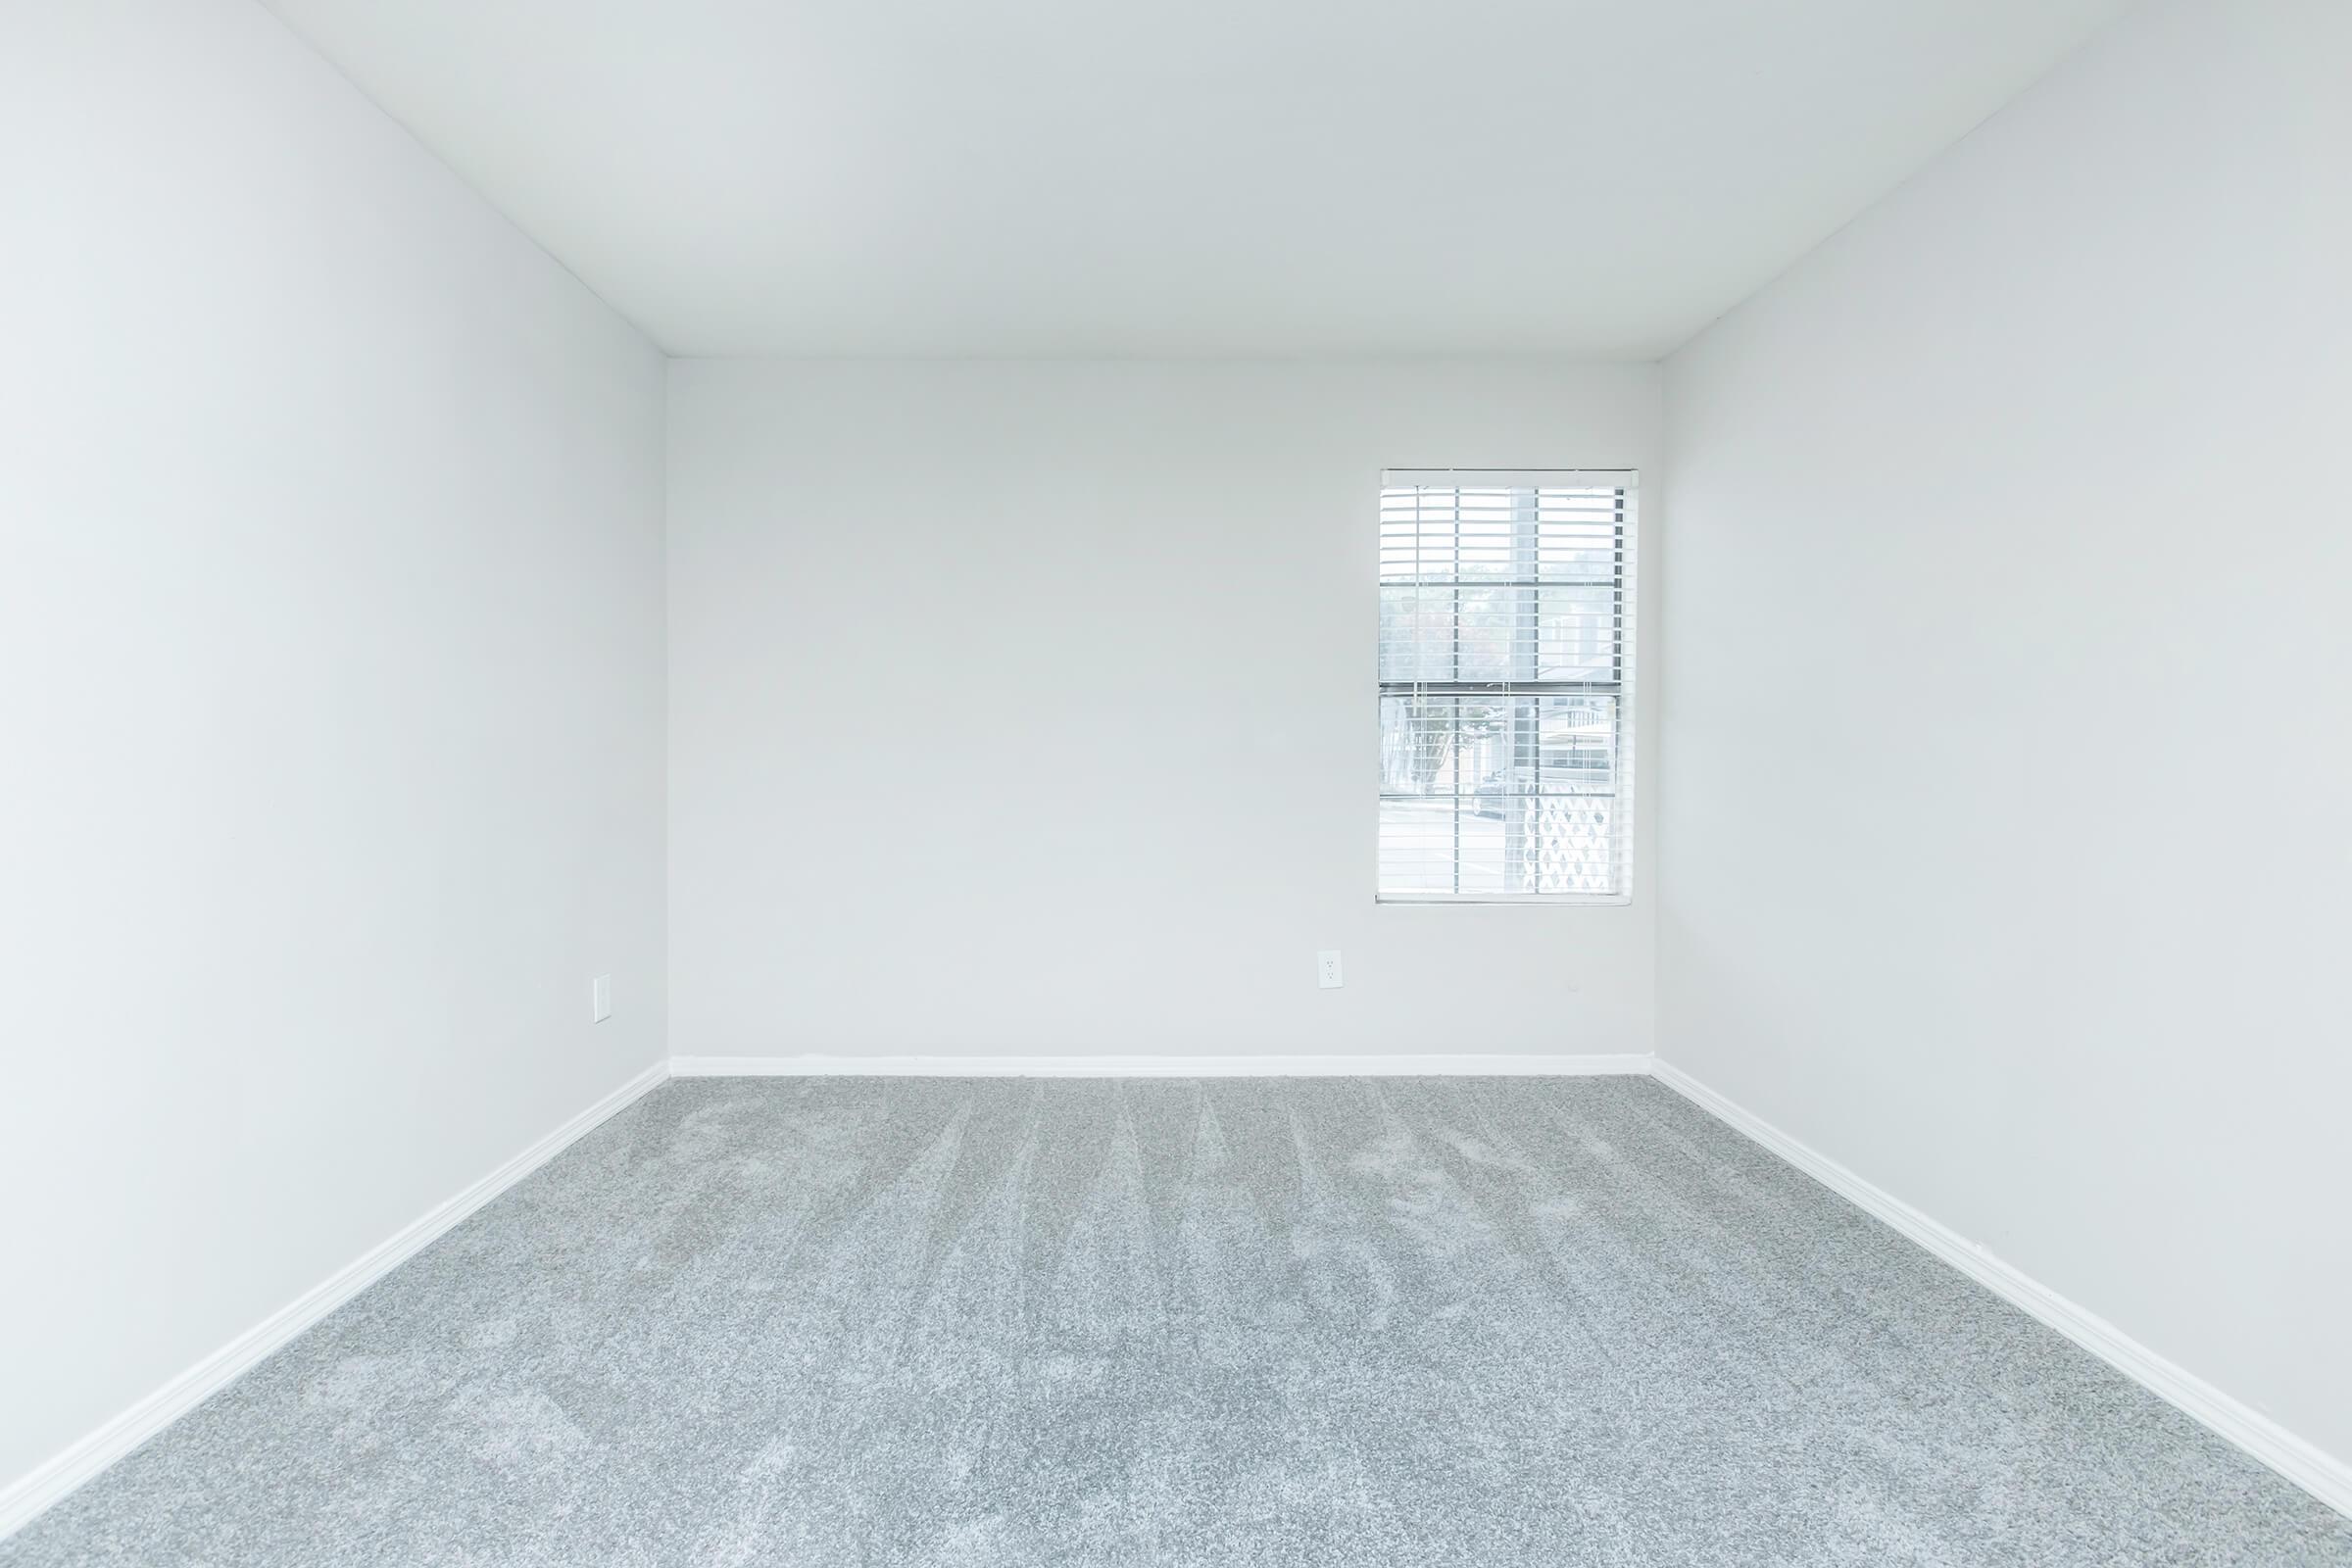 a close up of an empty room